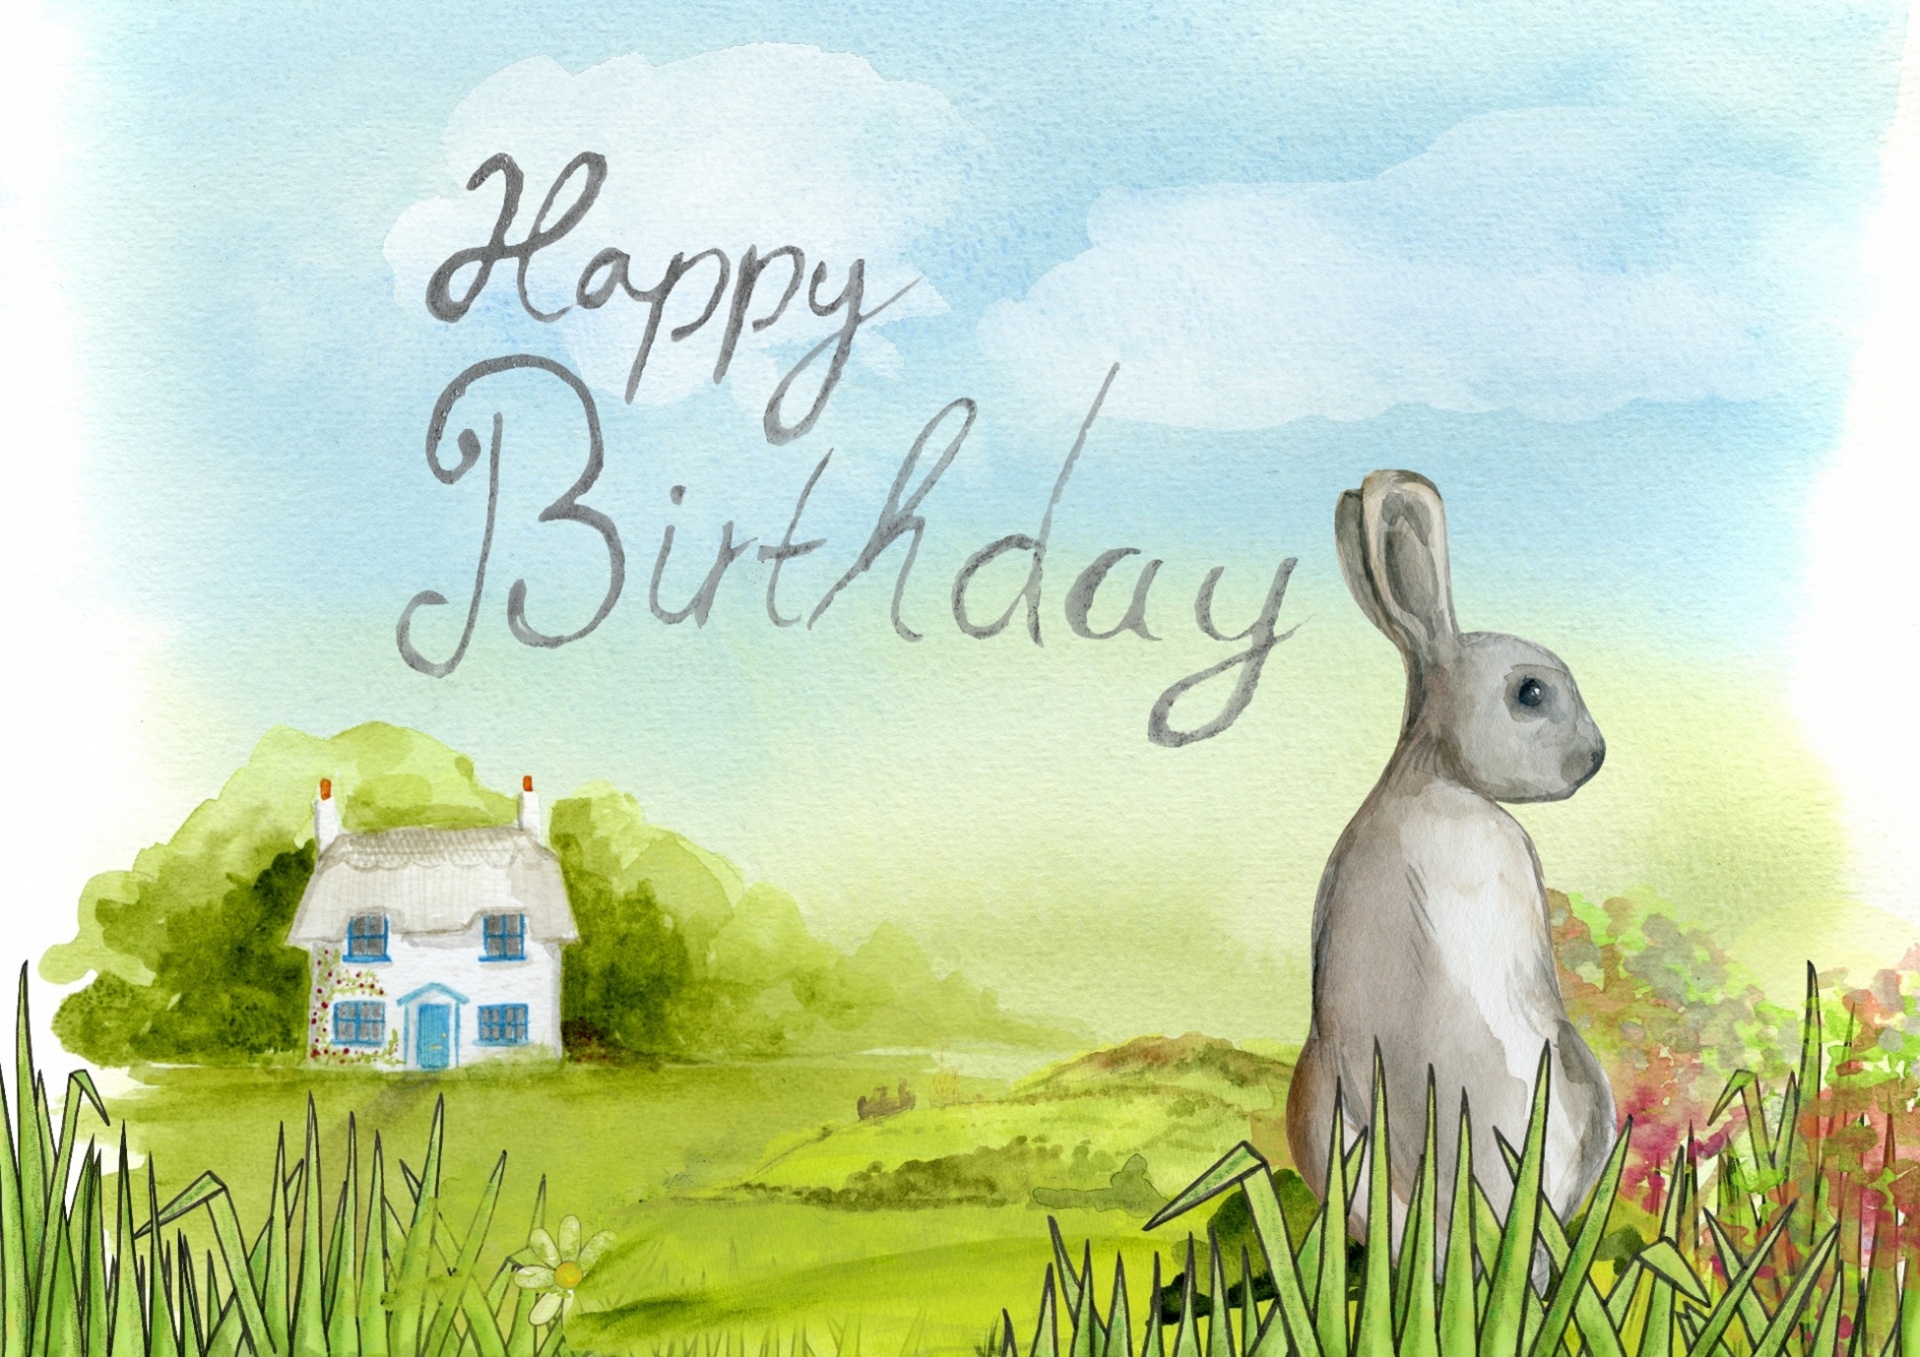 Happy Birthday Watercolor Greeting Card with a cute bunny - fun and colorful